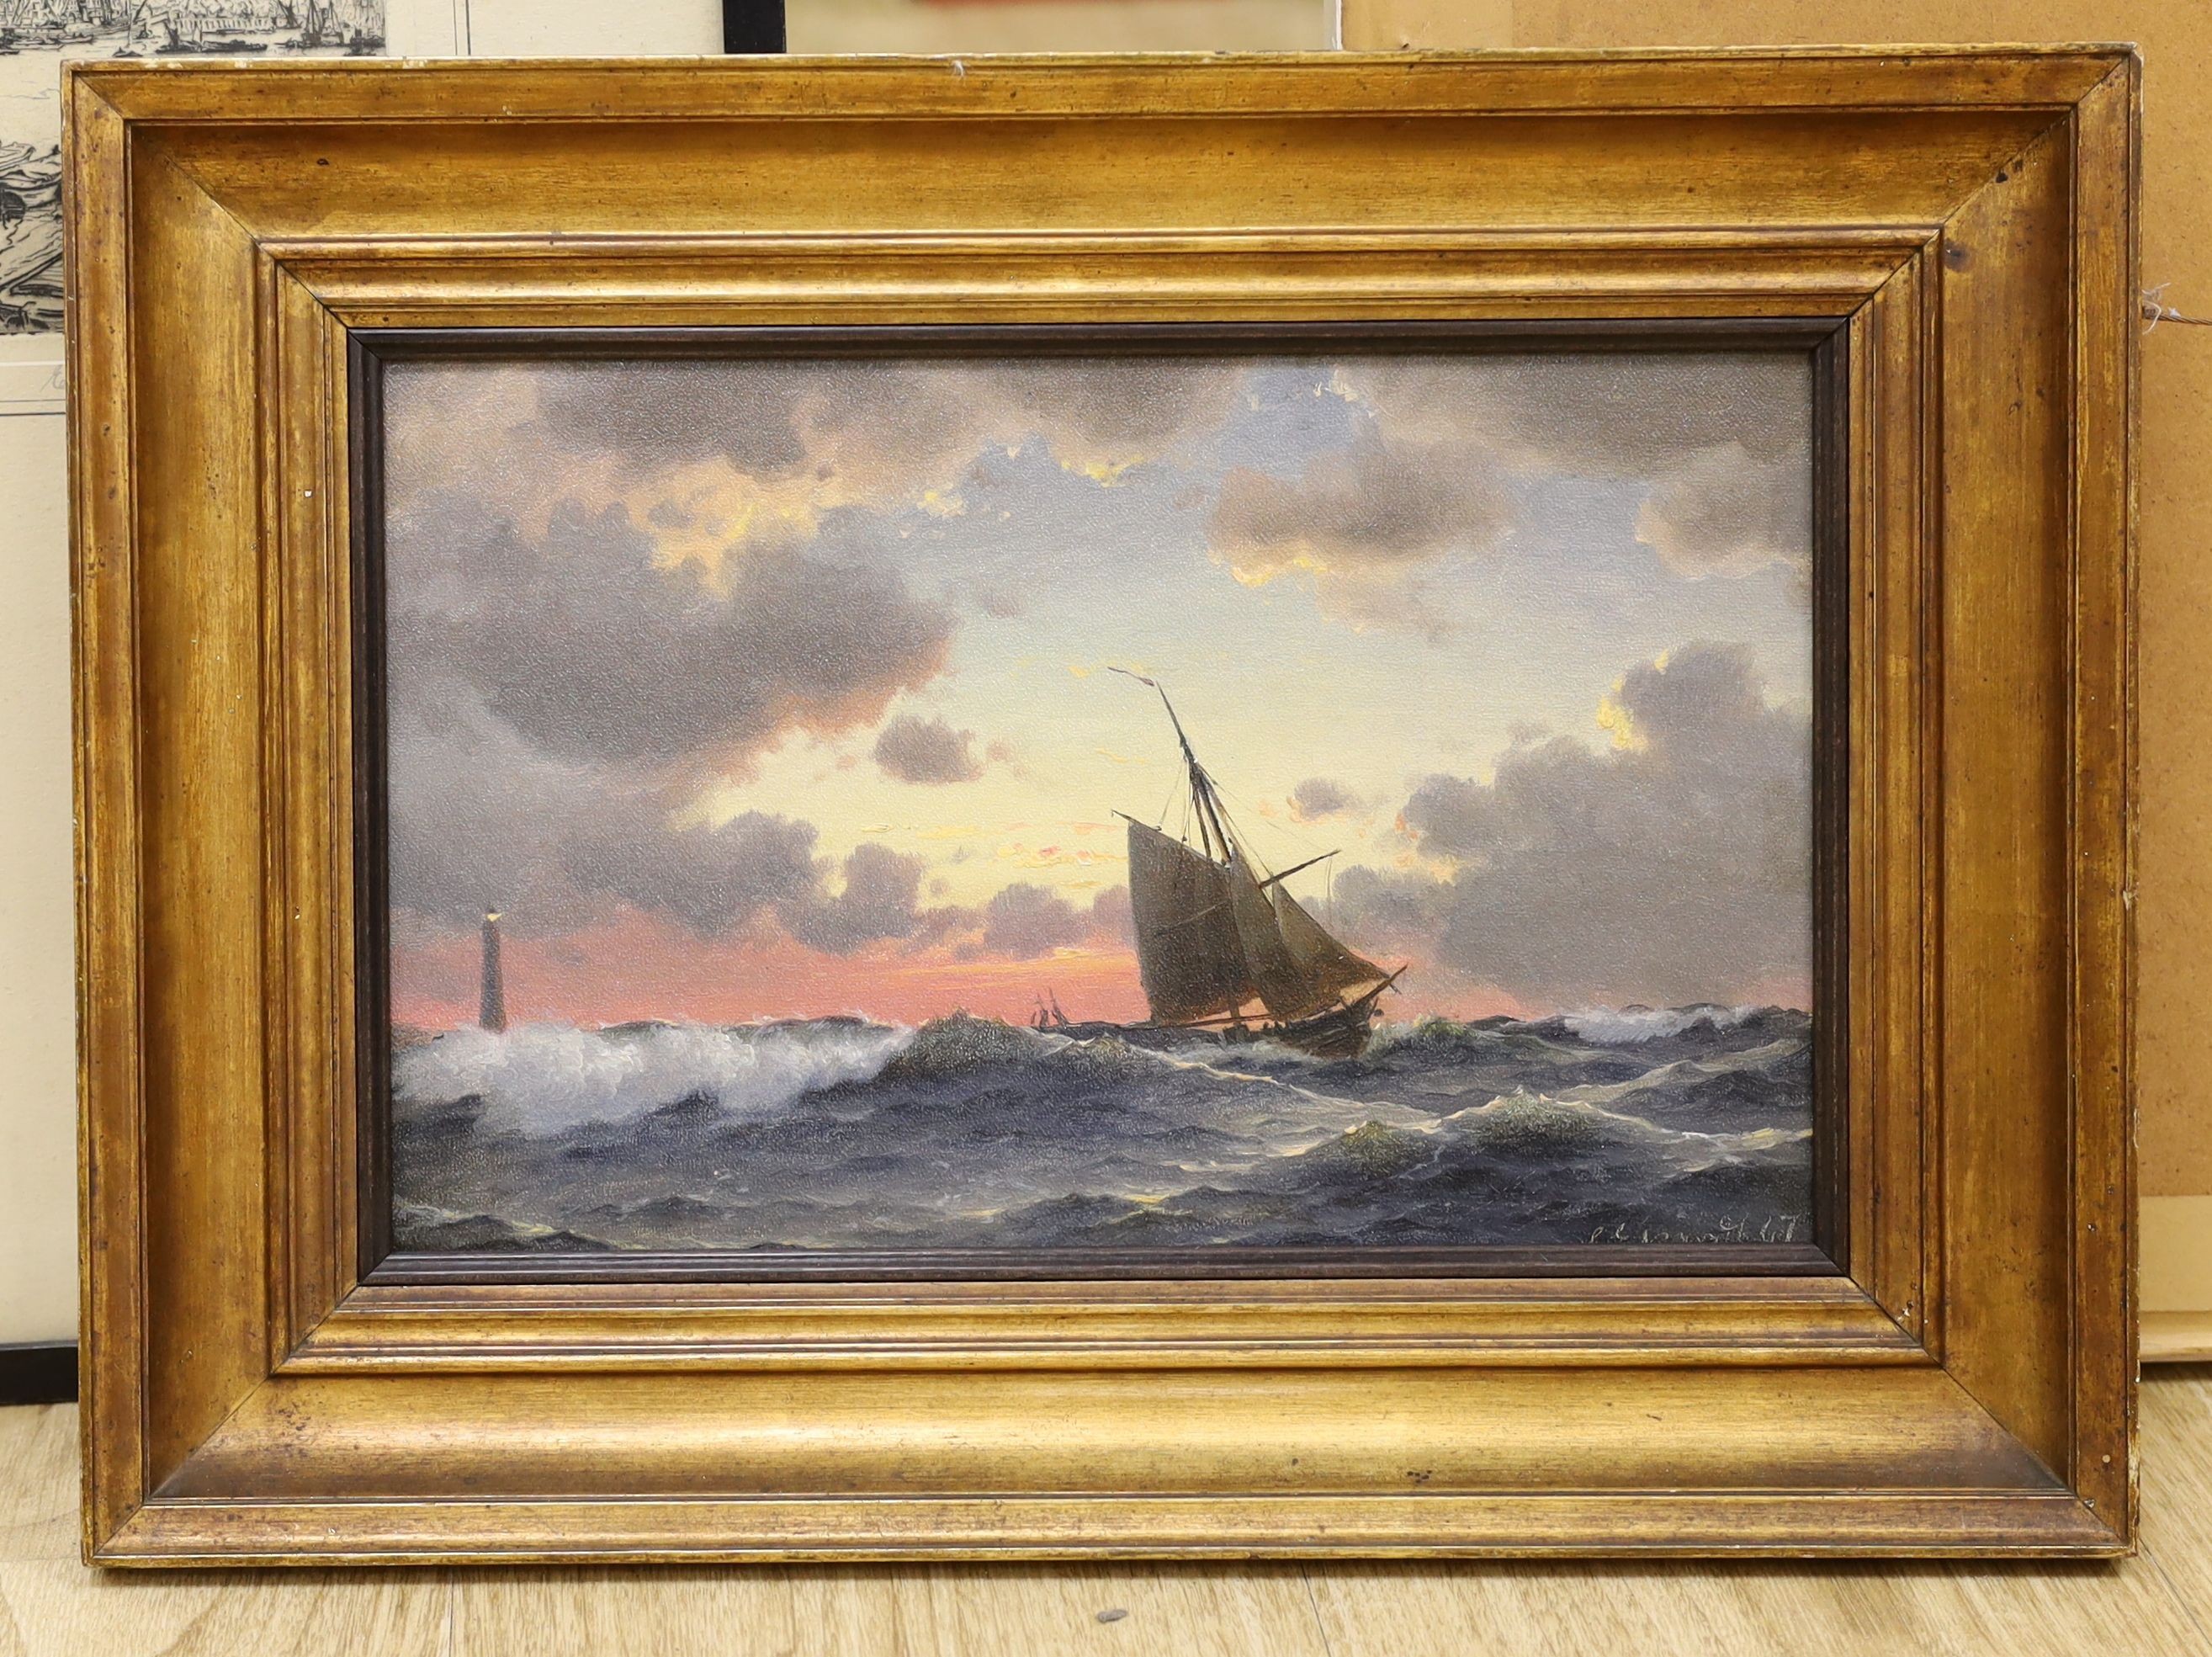 Christian Eckhardt (1832-1914), oil on canvas, Off Skagen at Sunset, signed and dated 1867, 20 x 31cm